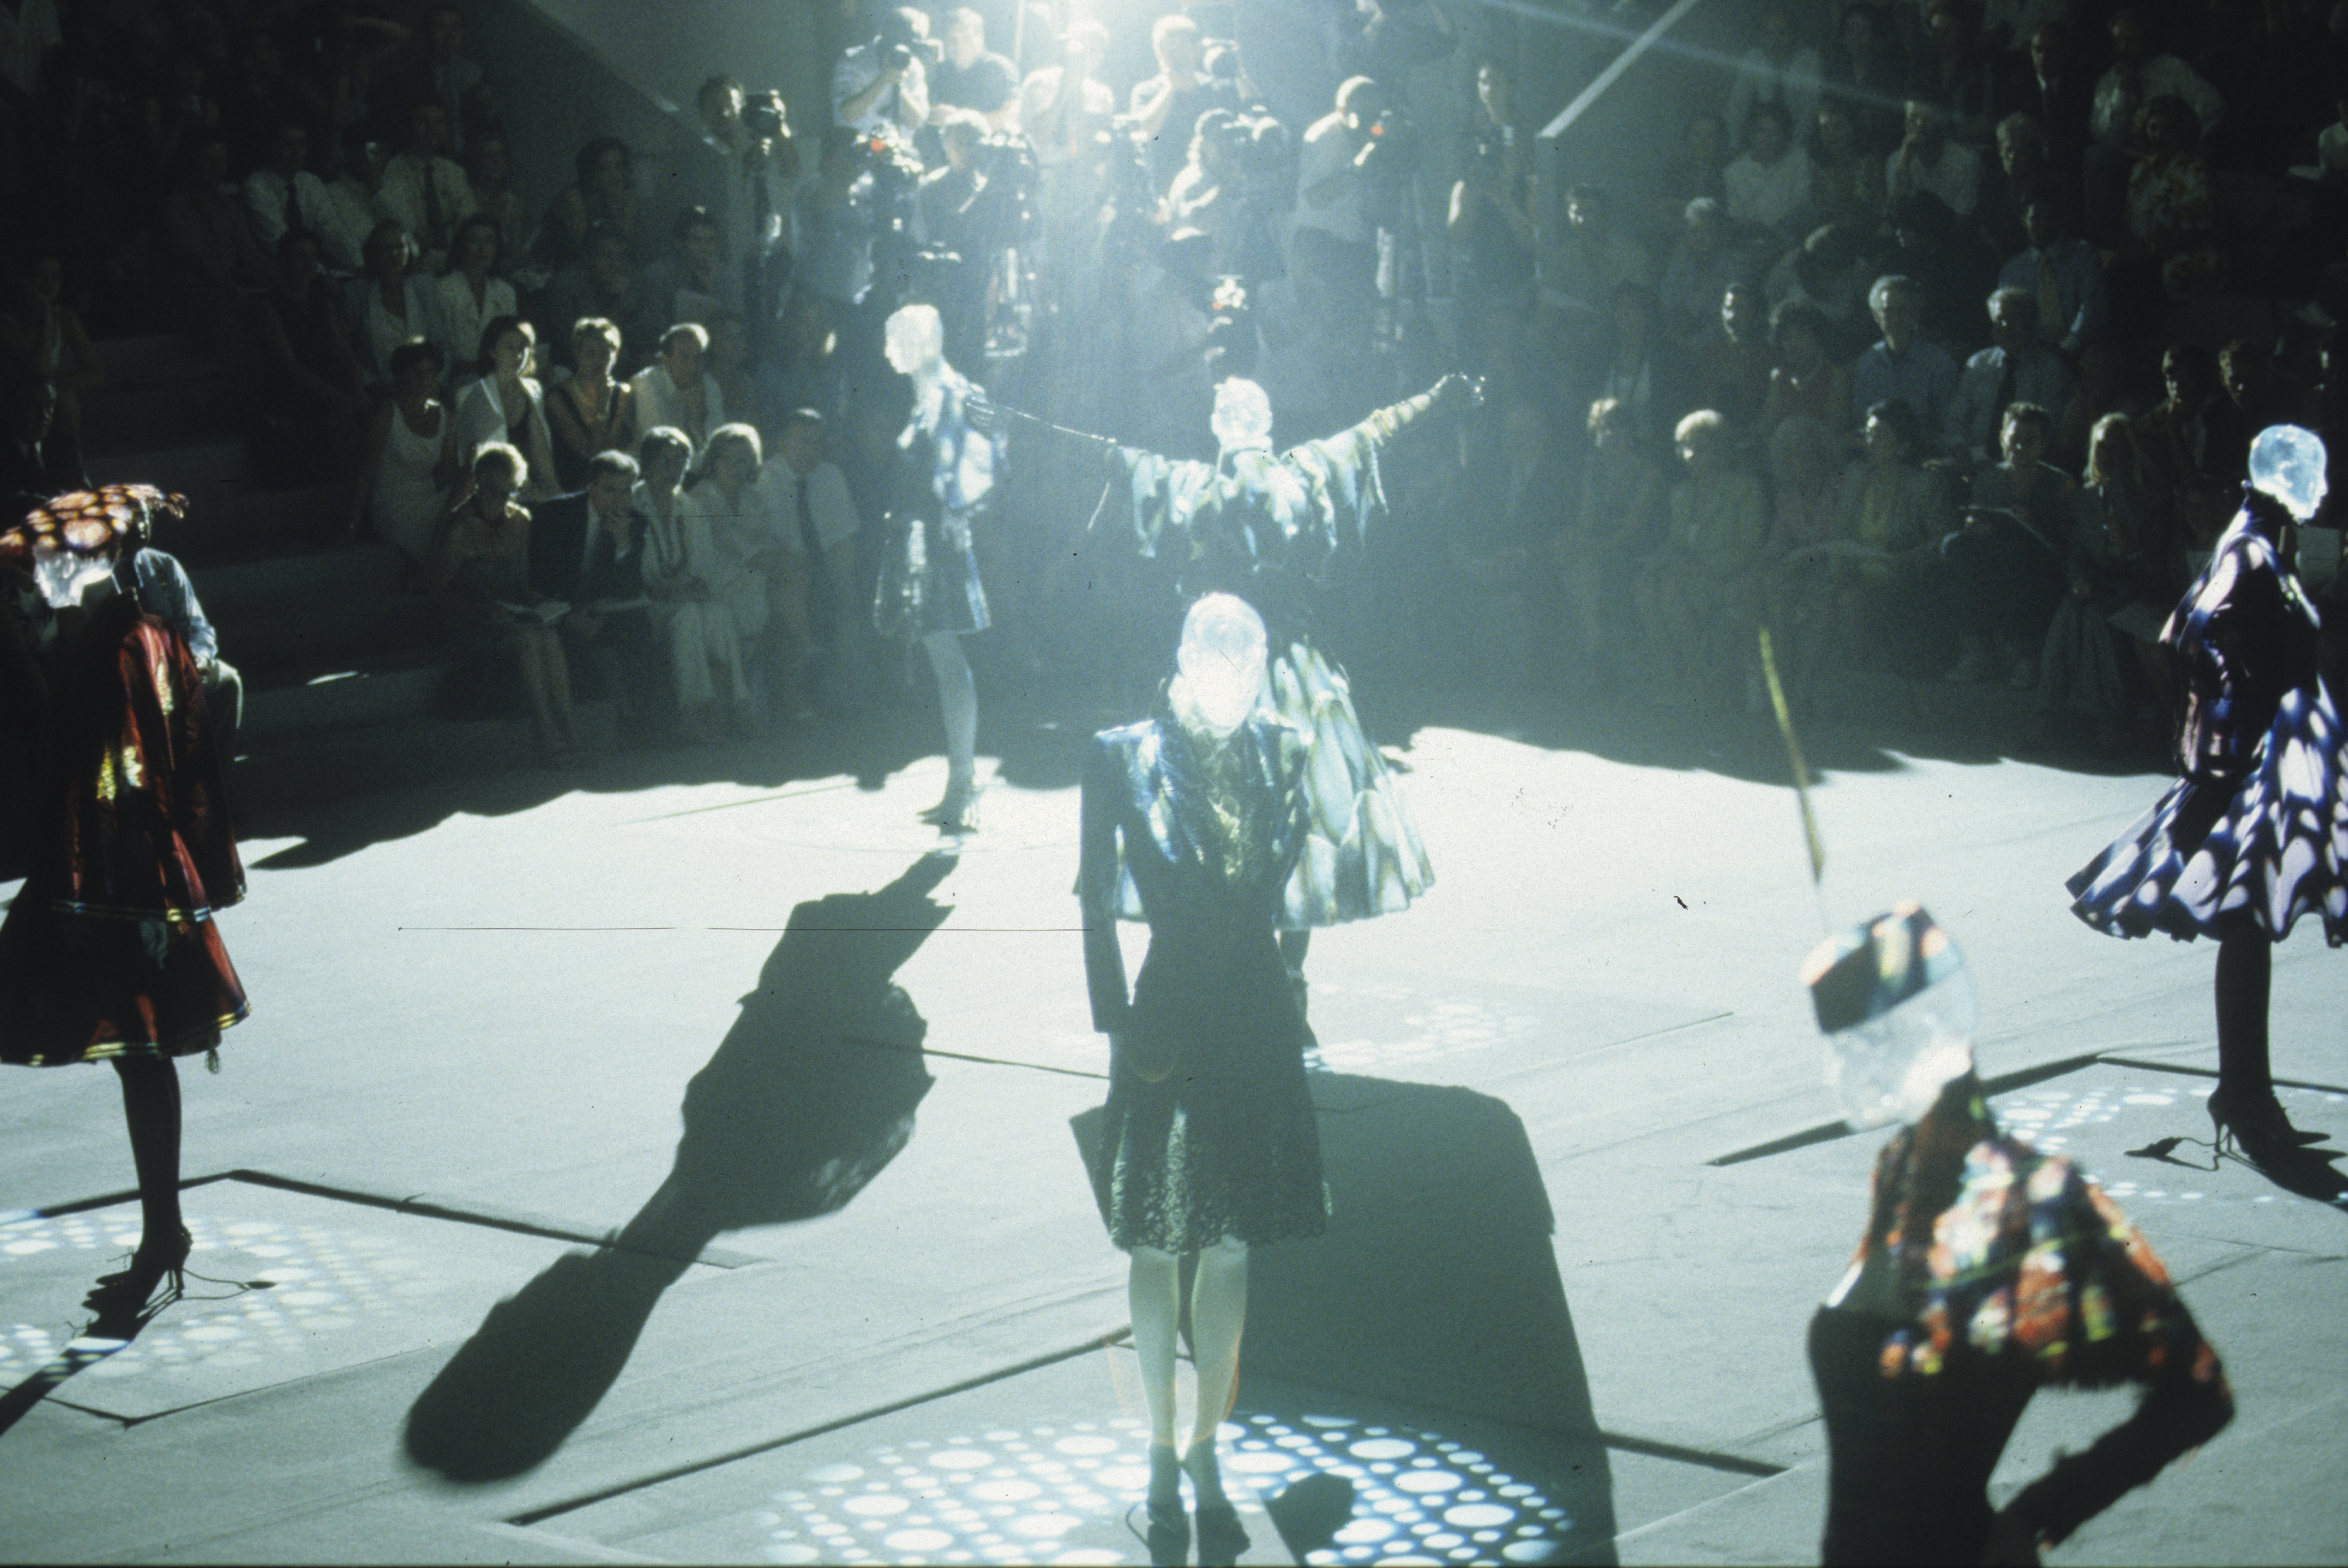 Fashion models walk a runway with patterned clothing in a spotlight, surrounded by an audience